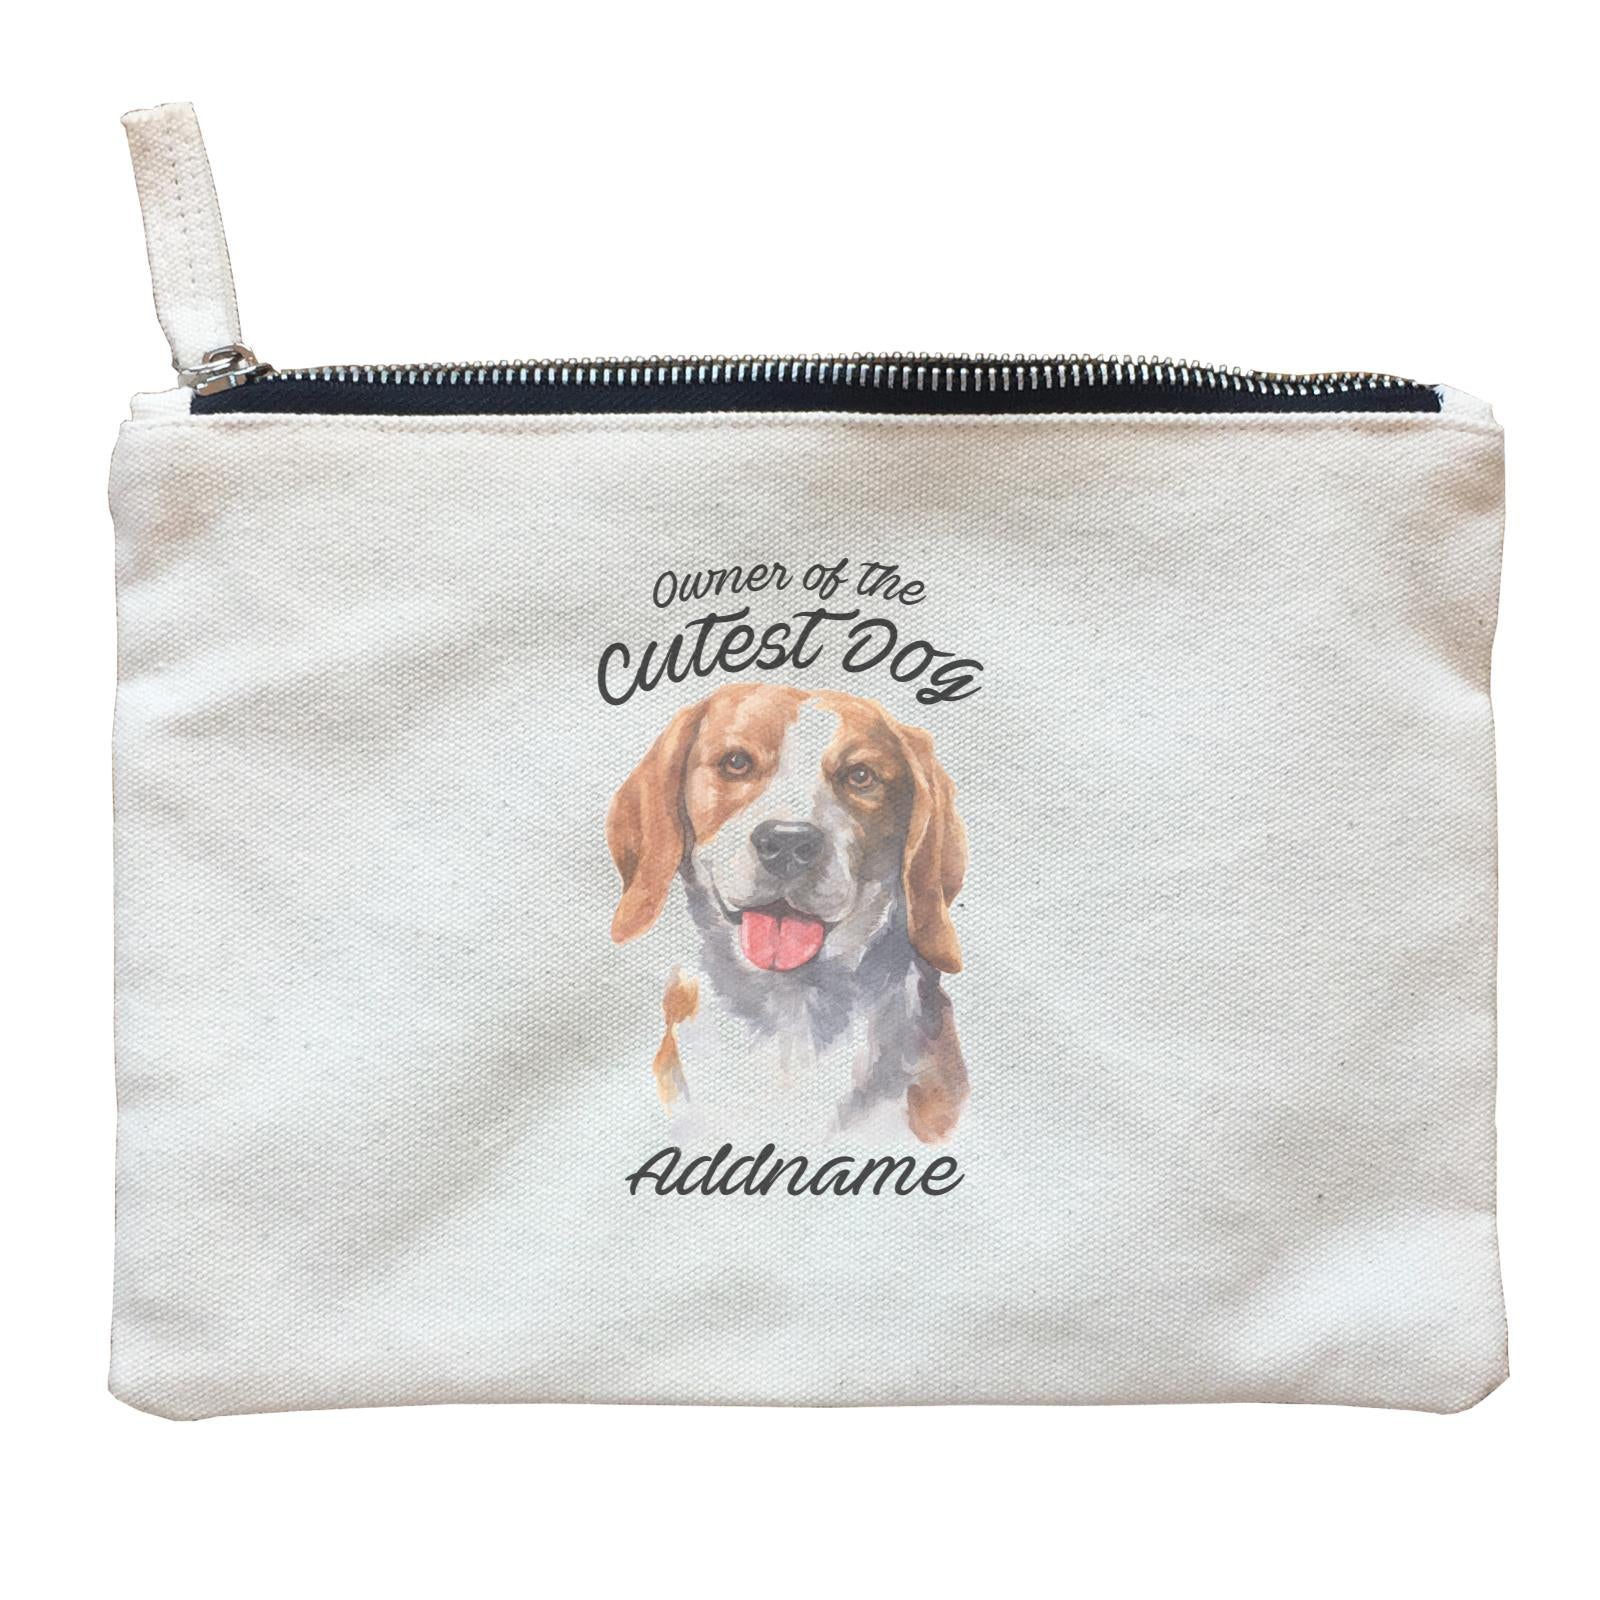 Watercolor Dog Owner Of The Cutest Dog Beagle Smile Addname Zipper Pouch